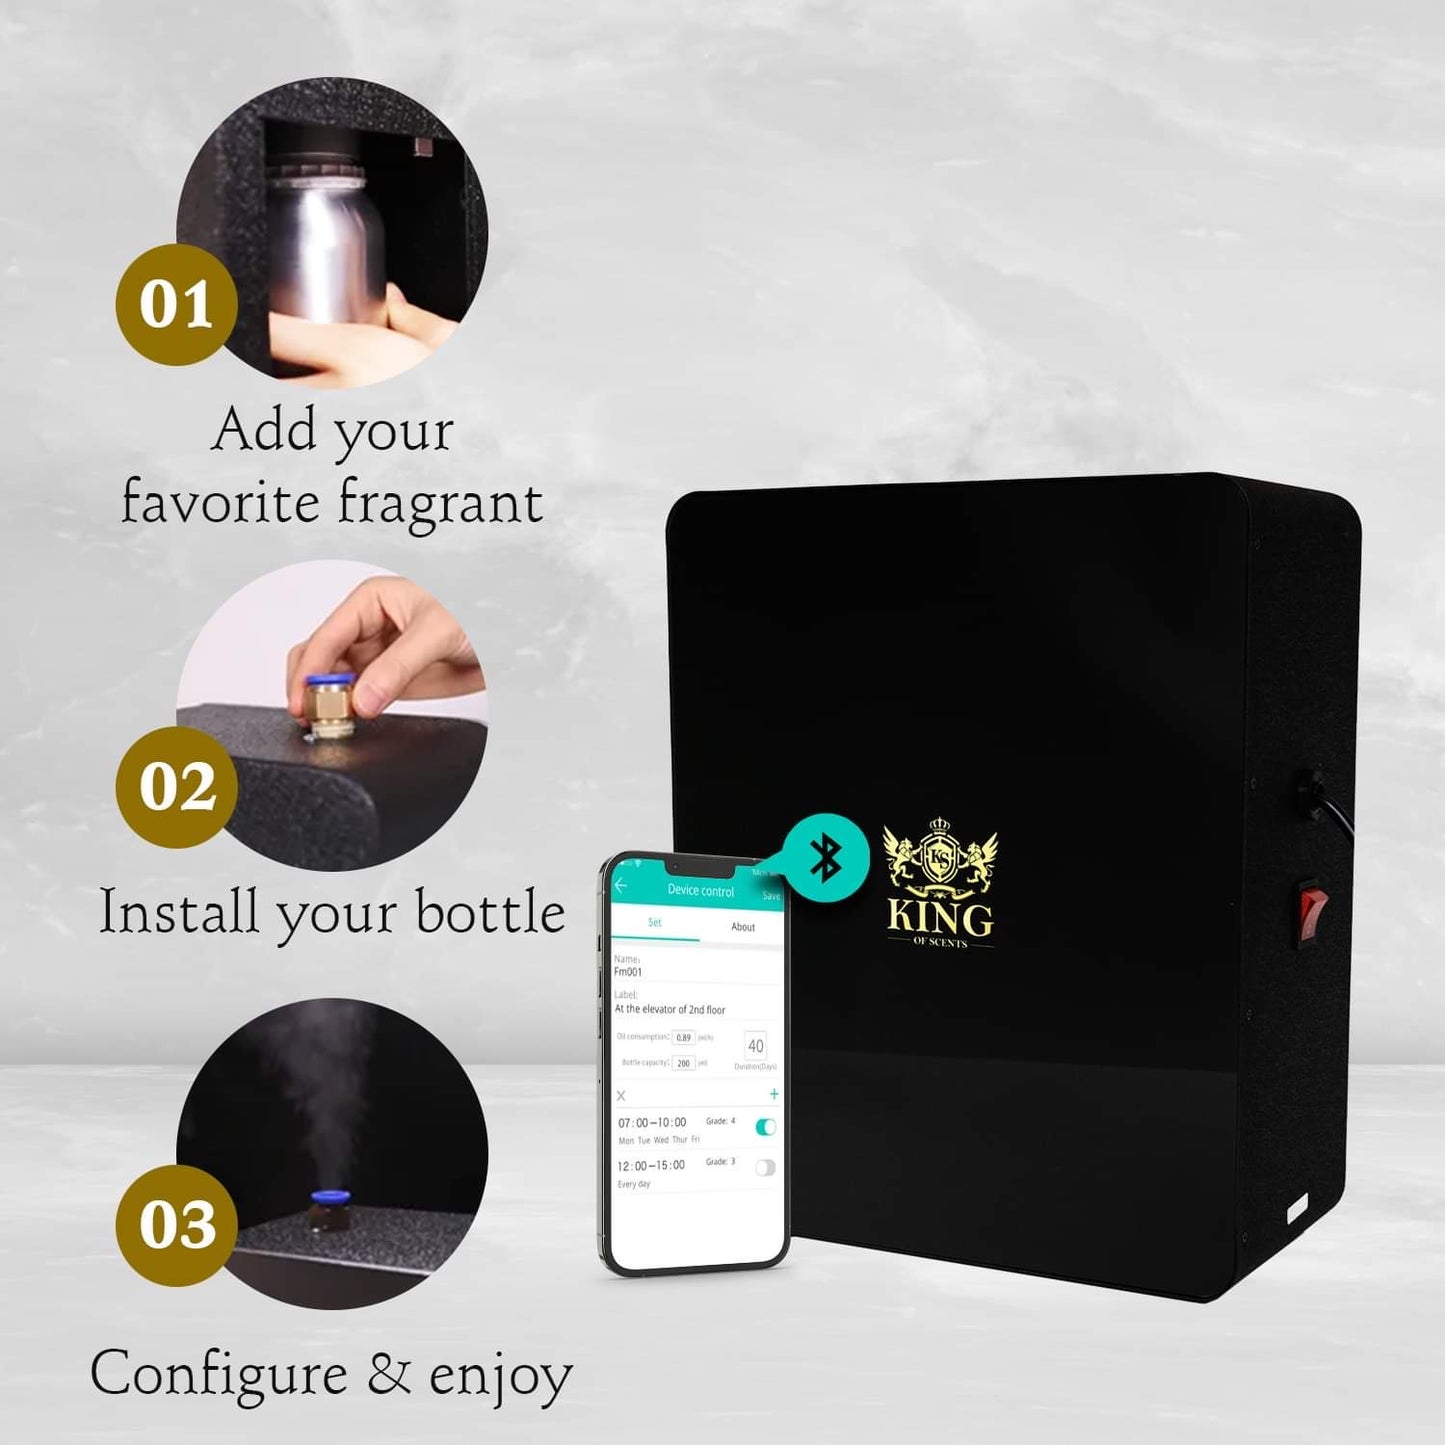 King of scents  aroma Essential Oil Diffuser , Nebulizing Diffusion System, Heat-Free System for Home or Commercial Use, Covers up to 4,000 -5,000 Square feet - Sleek Black